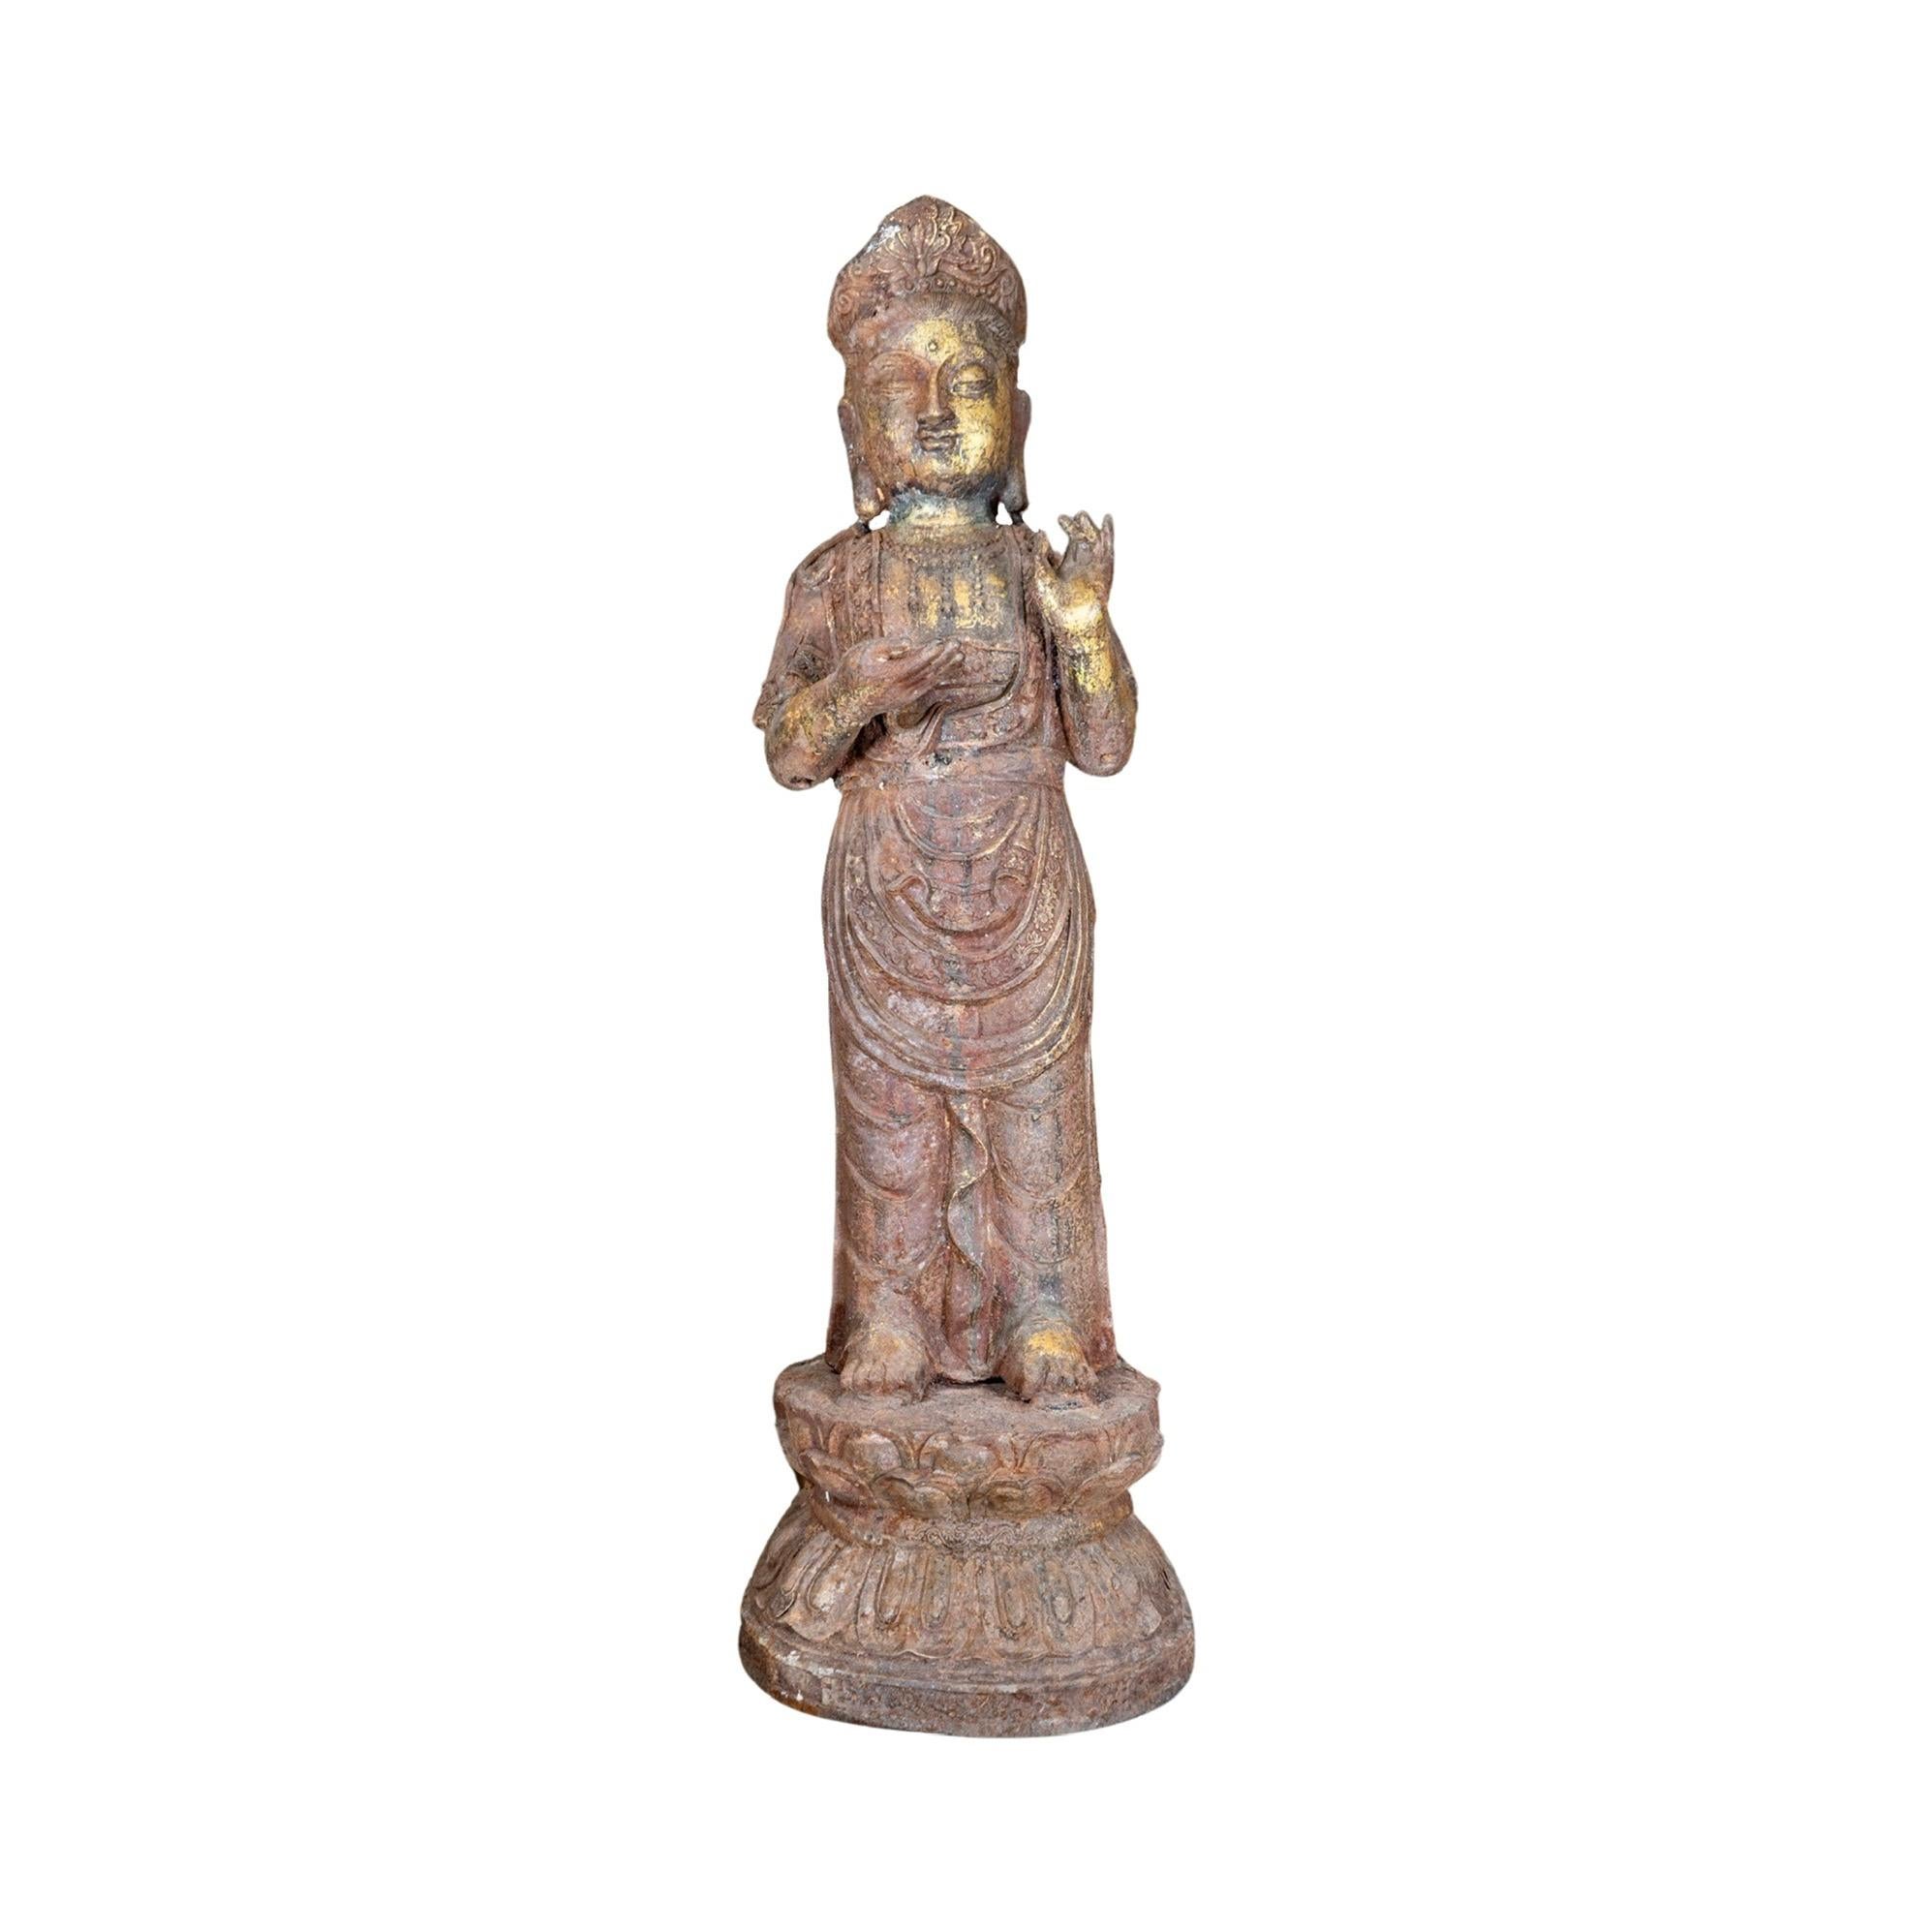 This Ming Dynasty iron-standing Guanyin sculpture from China in the 16th century is a masterpiece of cast iron with a rustic patina wear and a faded washed gold leaf finish. Perfect for collectors and admirers of ancient Chinese art, this standing